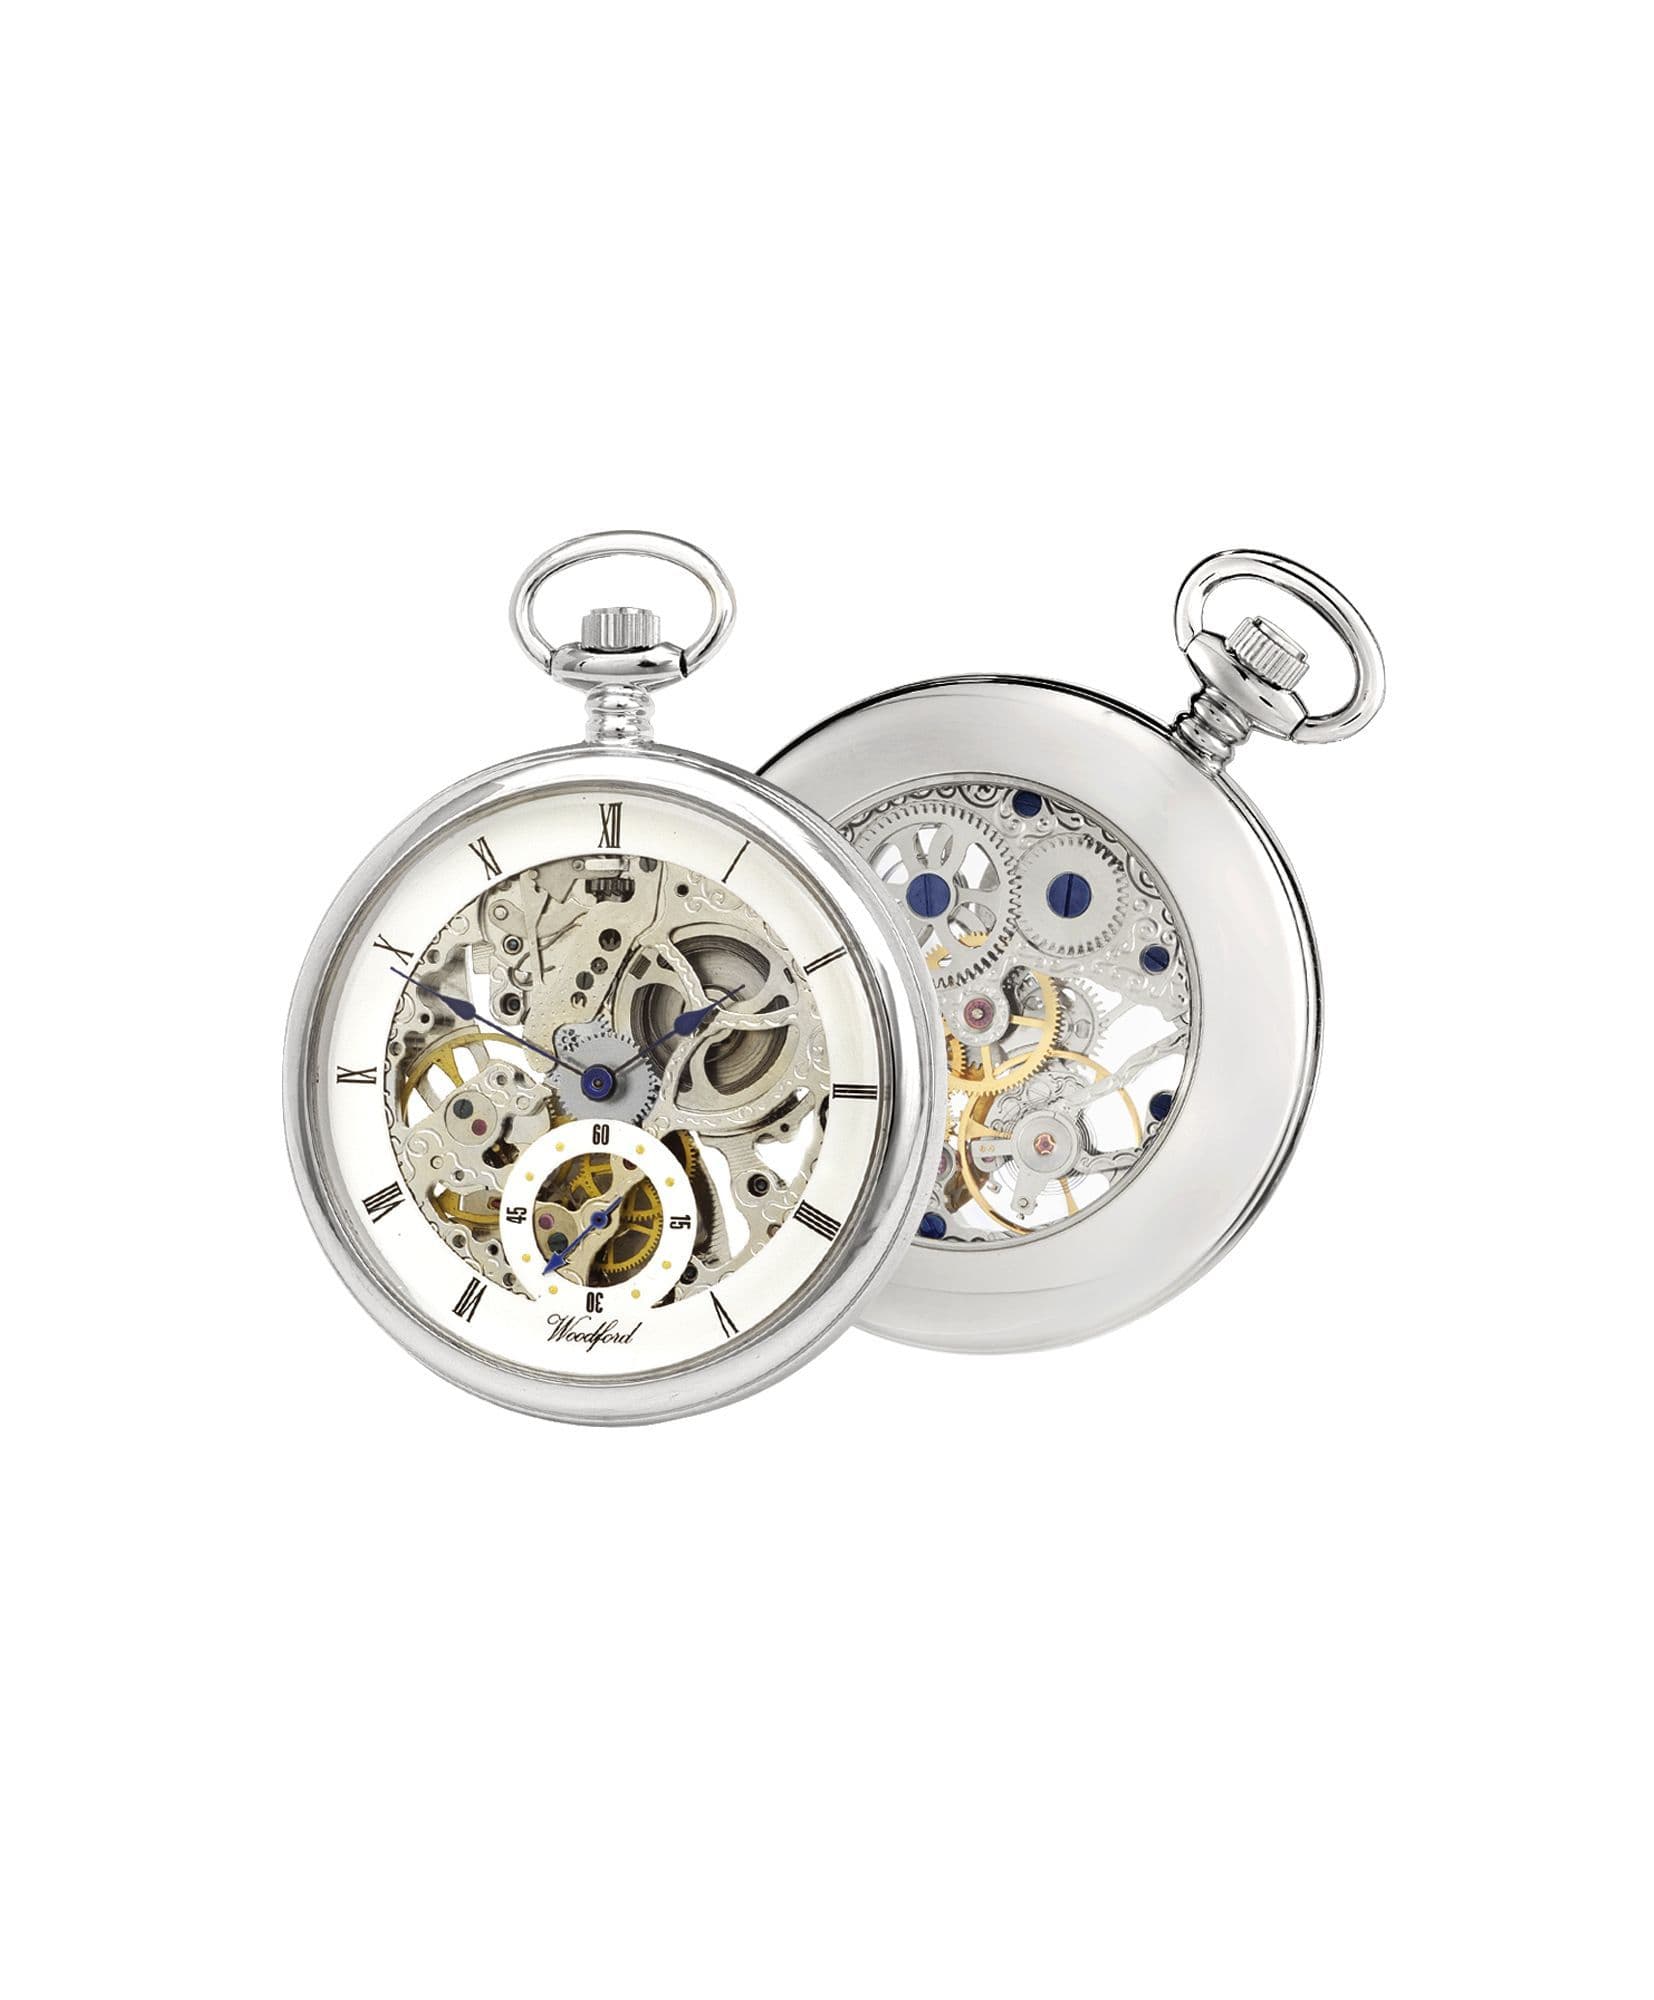 Mechanical Chrome Plated Open Faced Pocket Watch With Chain